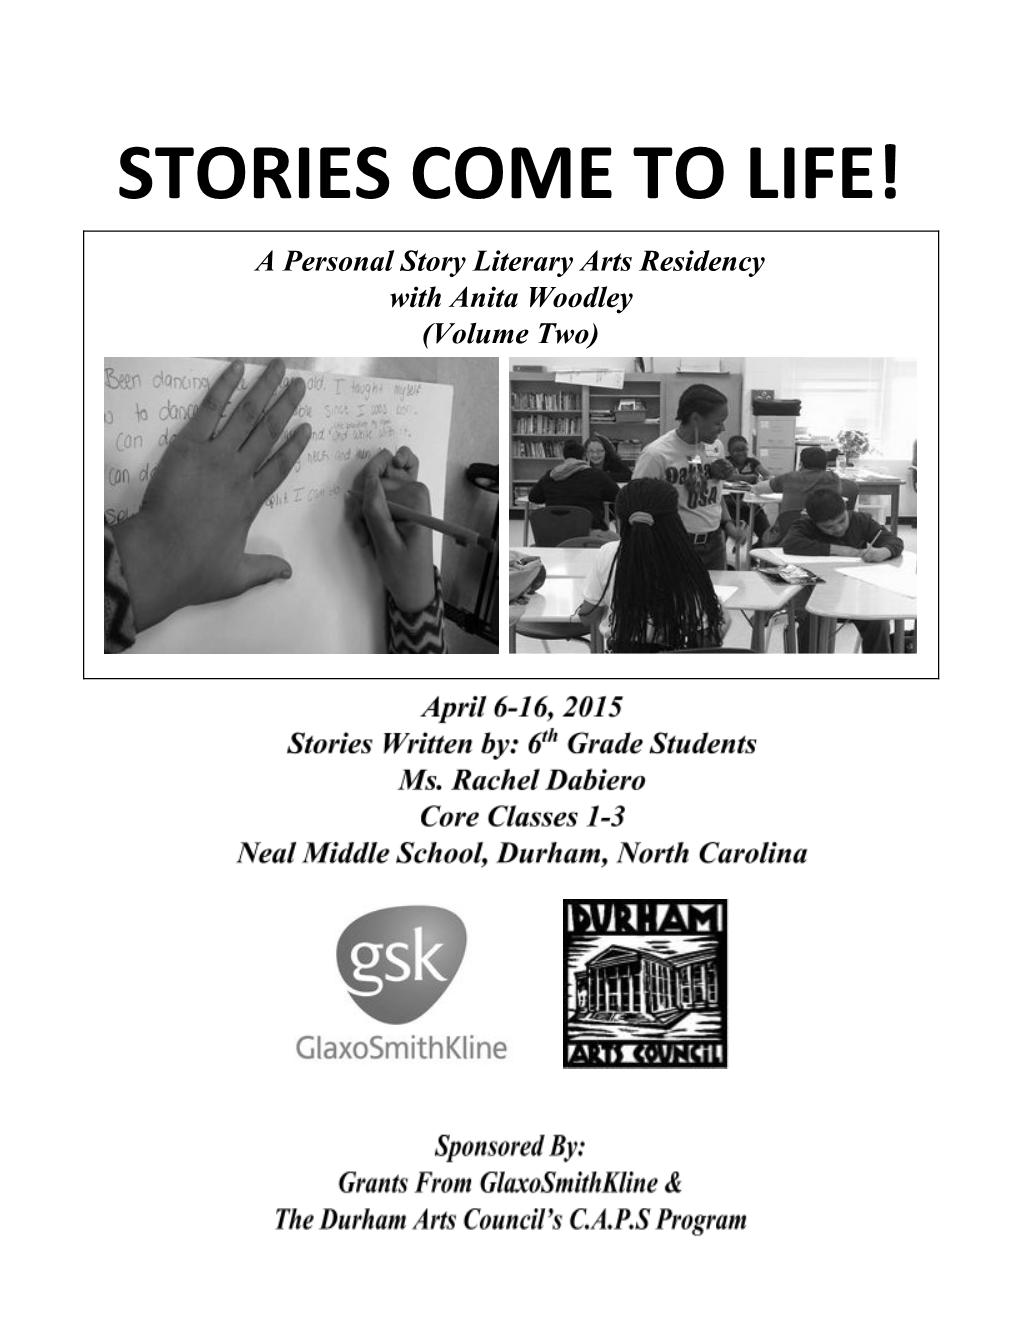 STORIES COME to LIFE! a Personal Story Literary Arts Residency with Anita Woodley (Volume Two)